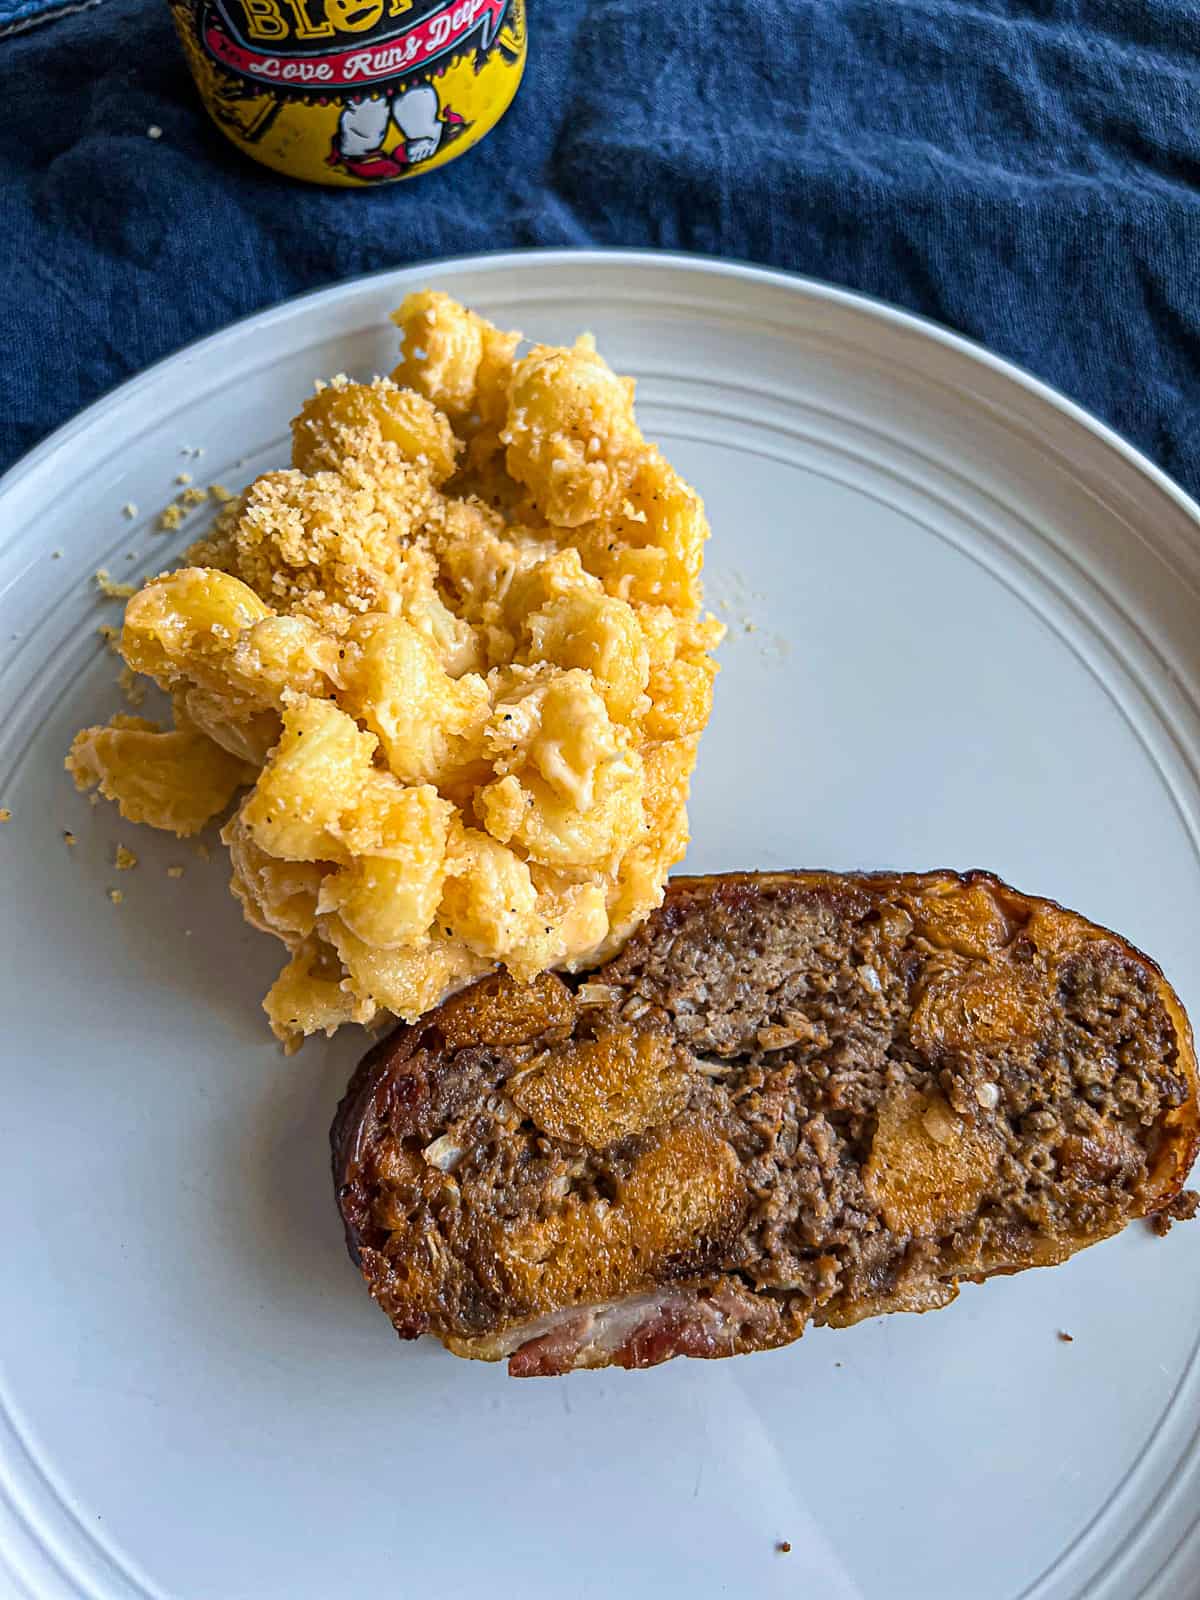 Smoked Mac And Cheese Dinner With Smoked Meatloaf